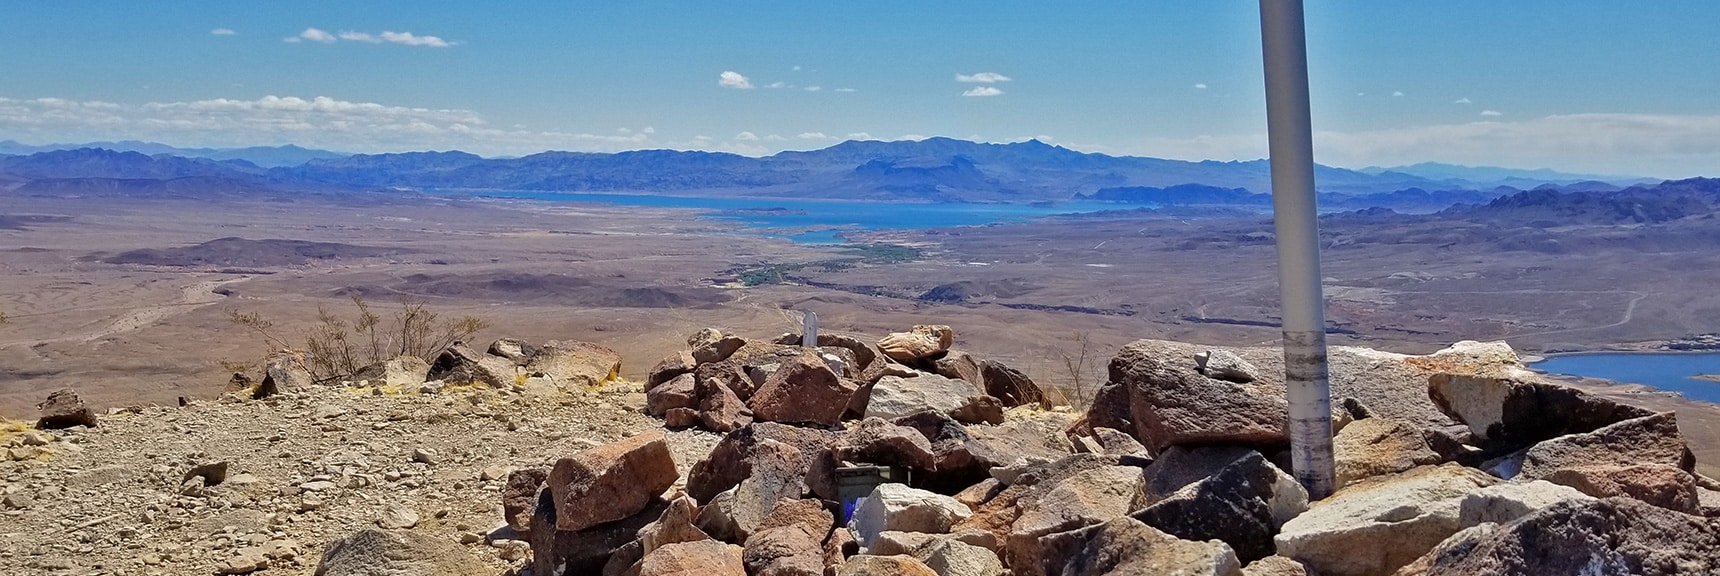 Lake Mead, Fortification Hill, Black Mesa, Hamblin Mts. Mt Wilson from Summit | Lava Butte | Lake Mead National Recreation Area, Nevada